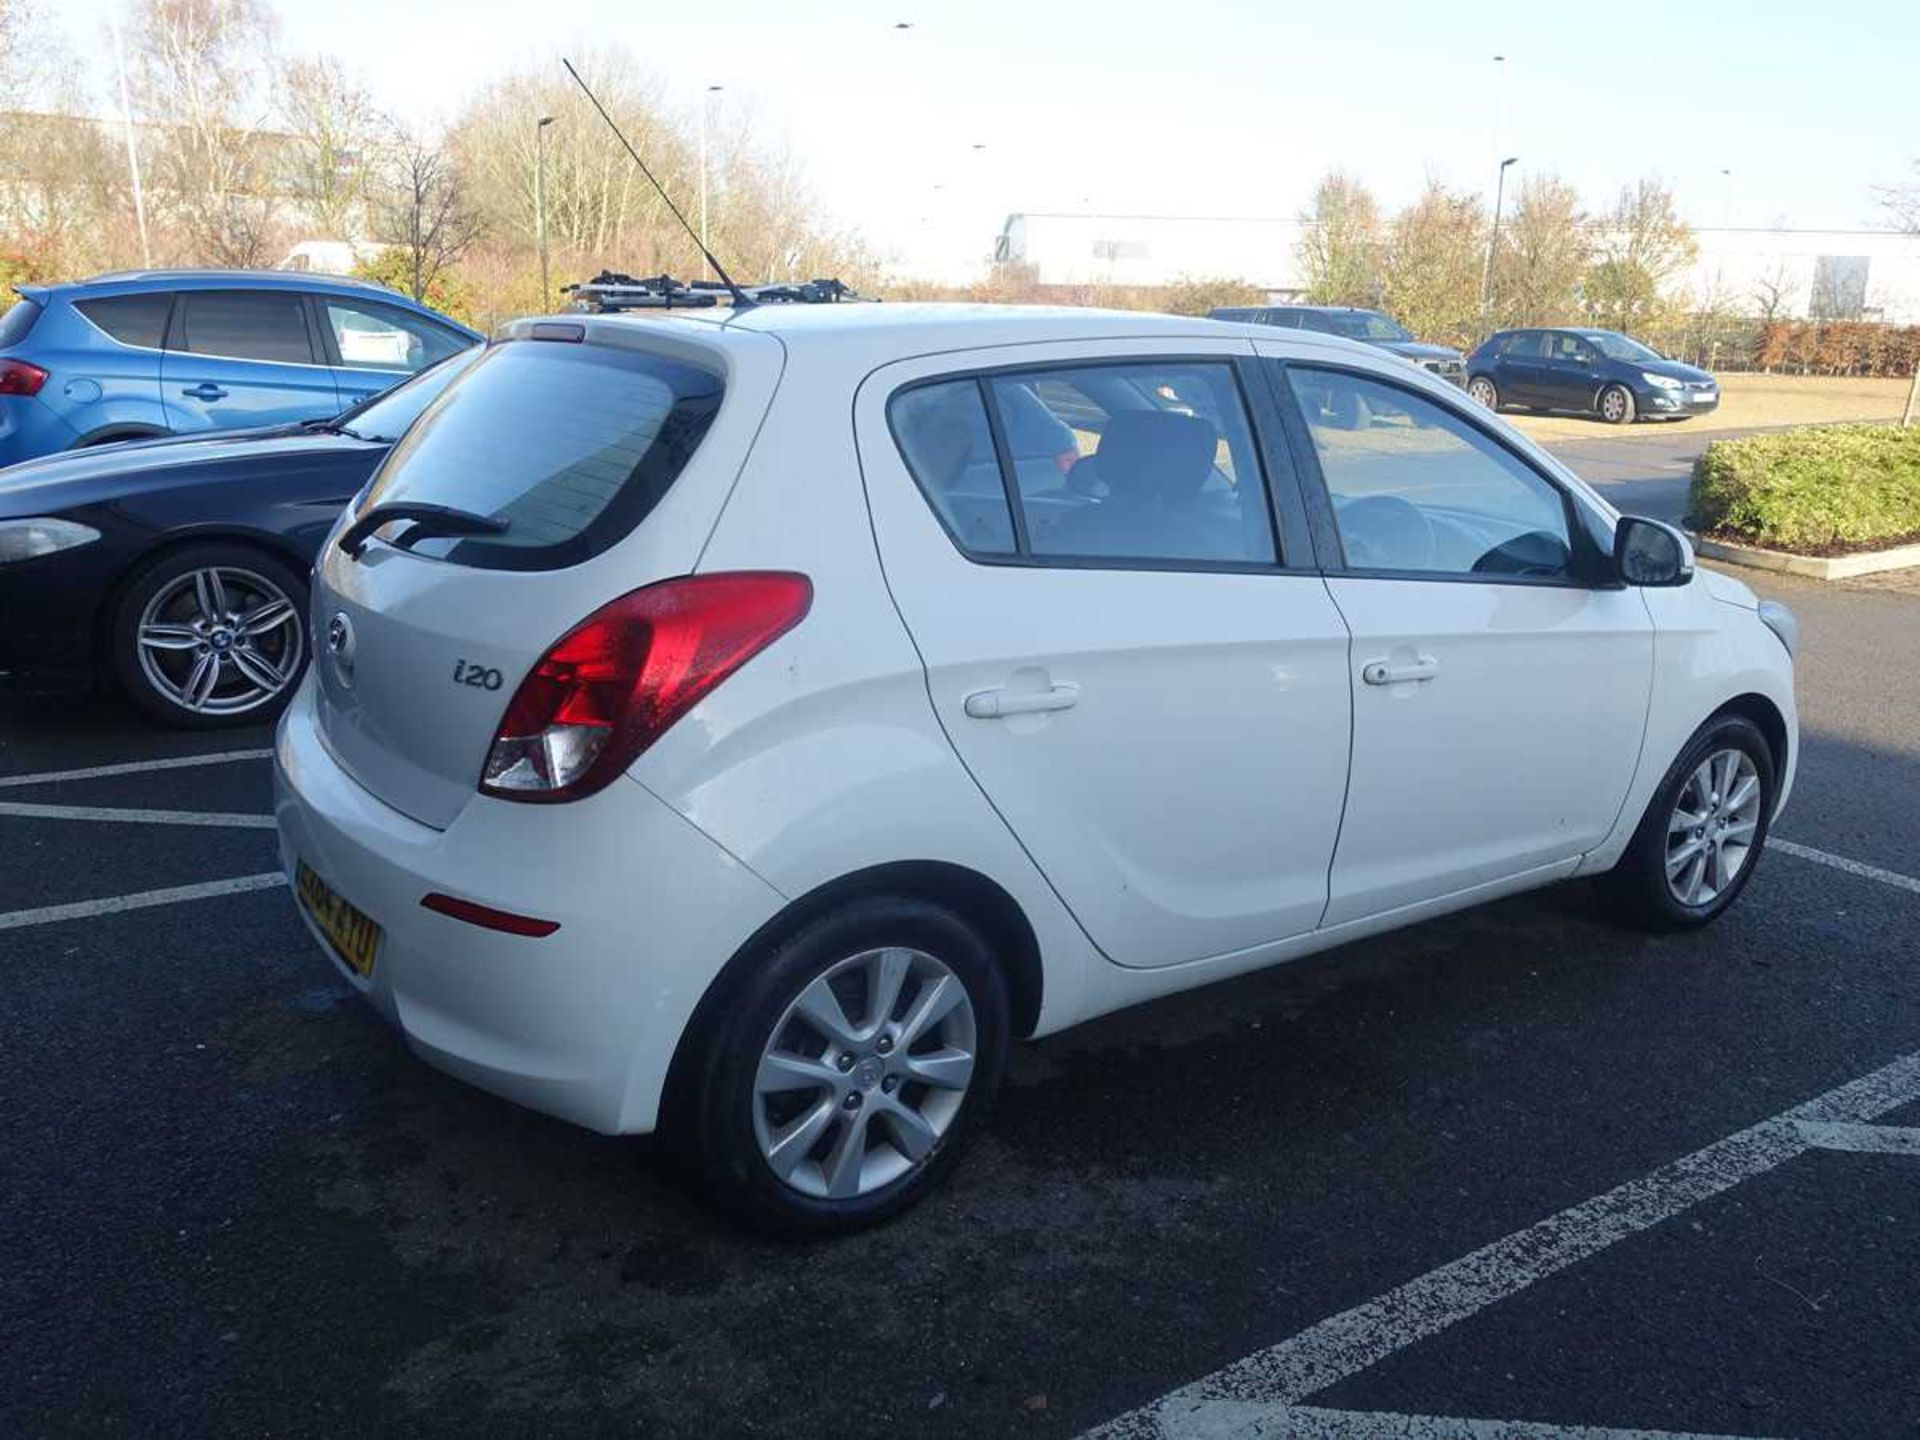 (EX64 AYU) Hyundai i20 Active in white, 5 speed manual, first registered 01/10/2014, 1248cc gas bi- - Image 8 of 9